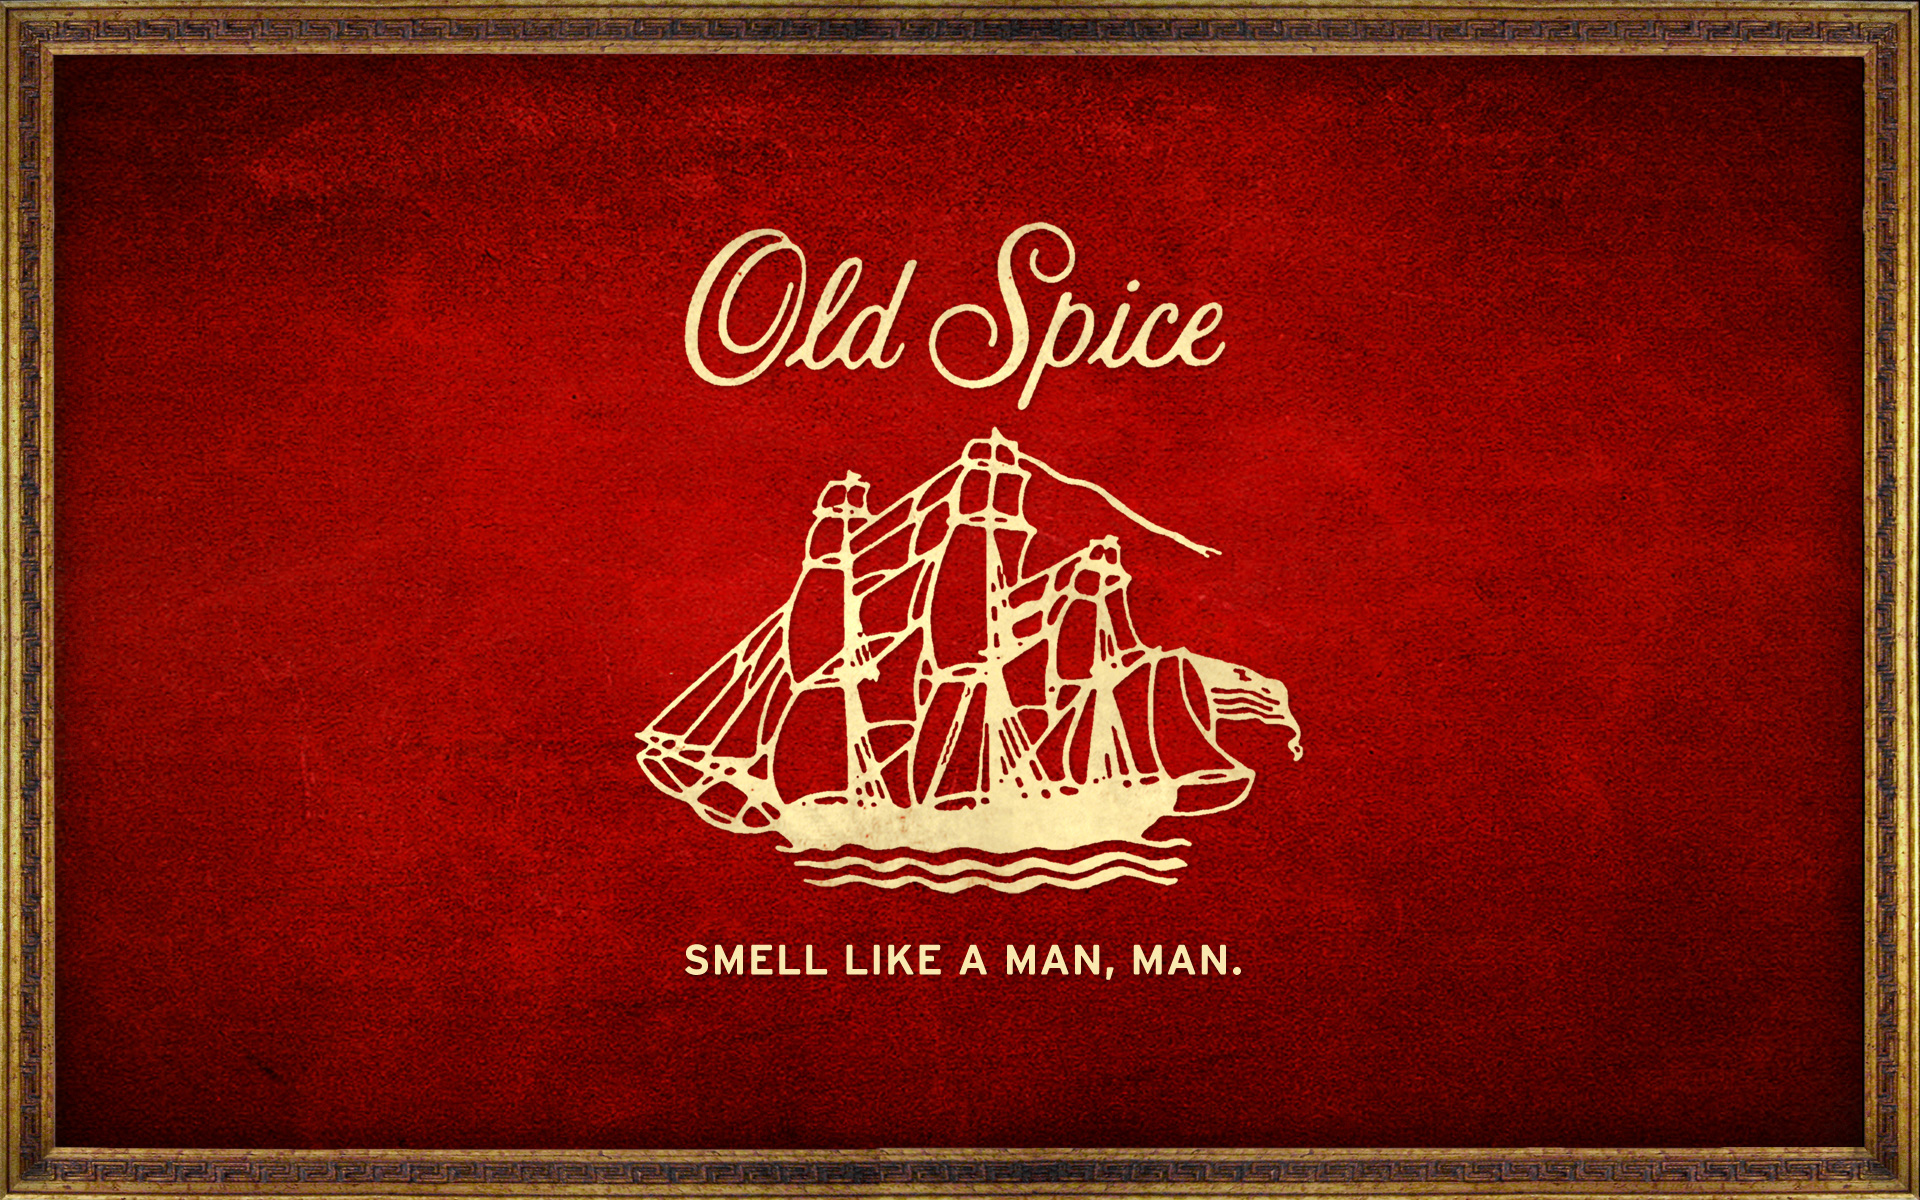 Download the Old Spice Wallpaper, Old Spice iPhone Wallpaper, Old ...